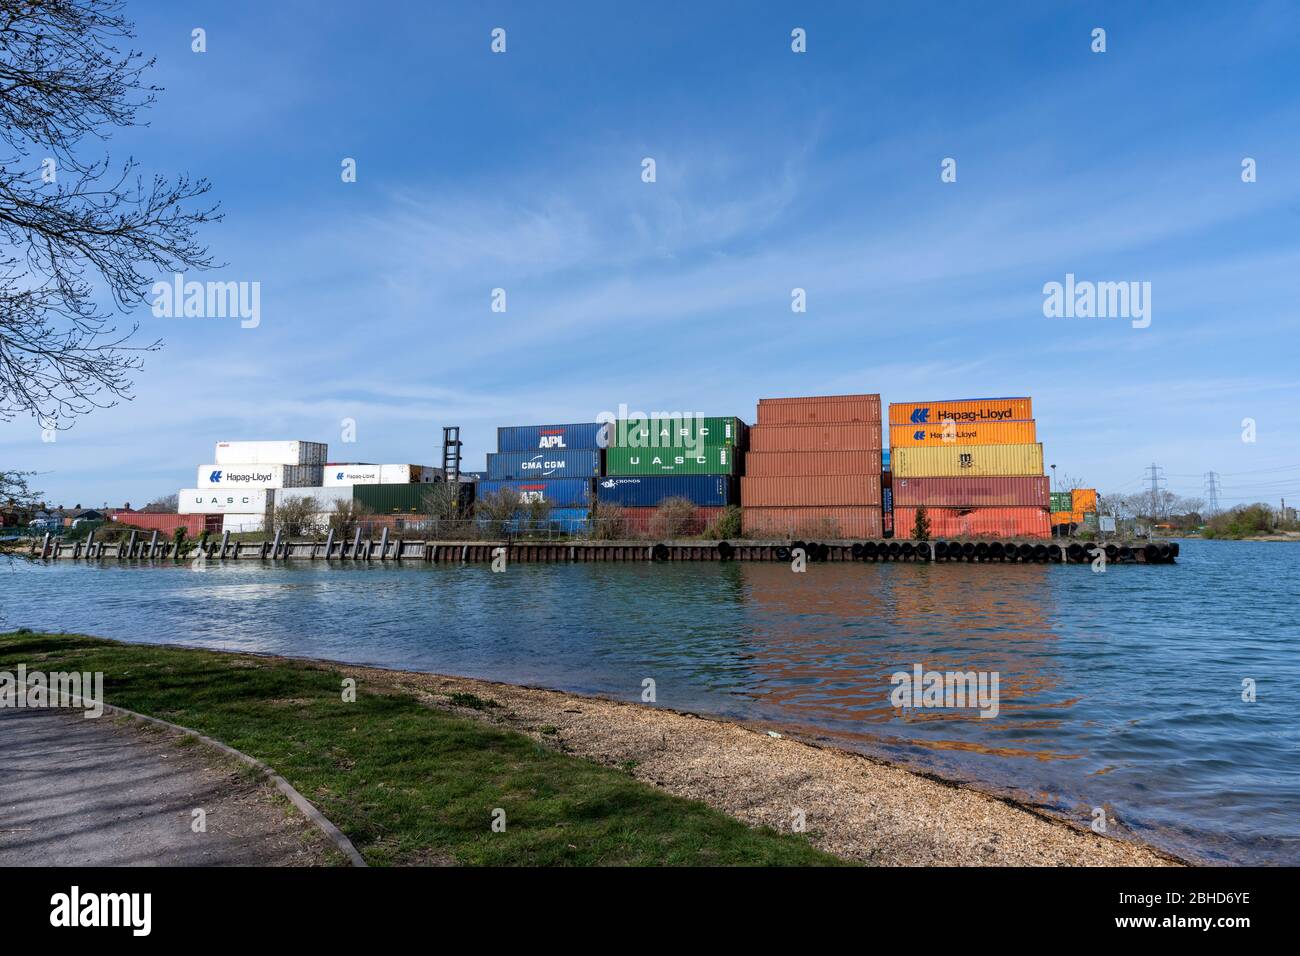 Shipping containers stacked high at Eling Wharf, Totton, Hampshire, England, UK - Eling Wharf is situated at the Northern End of Southampton Water. Stock Photo